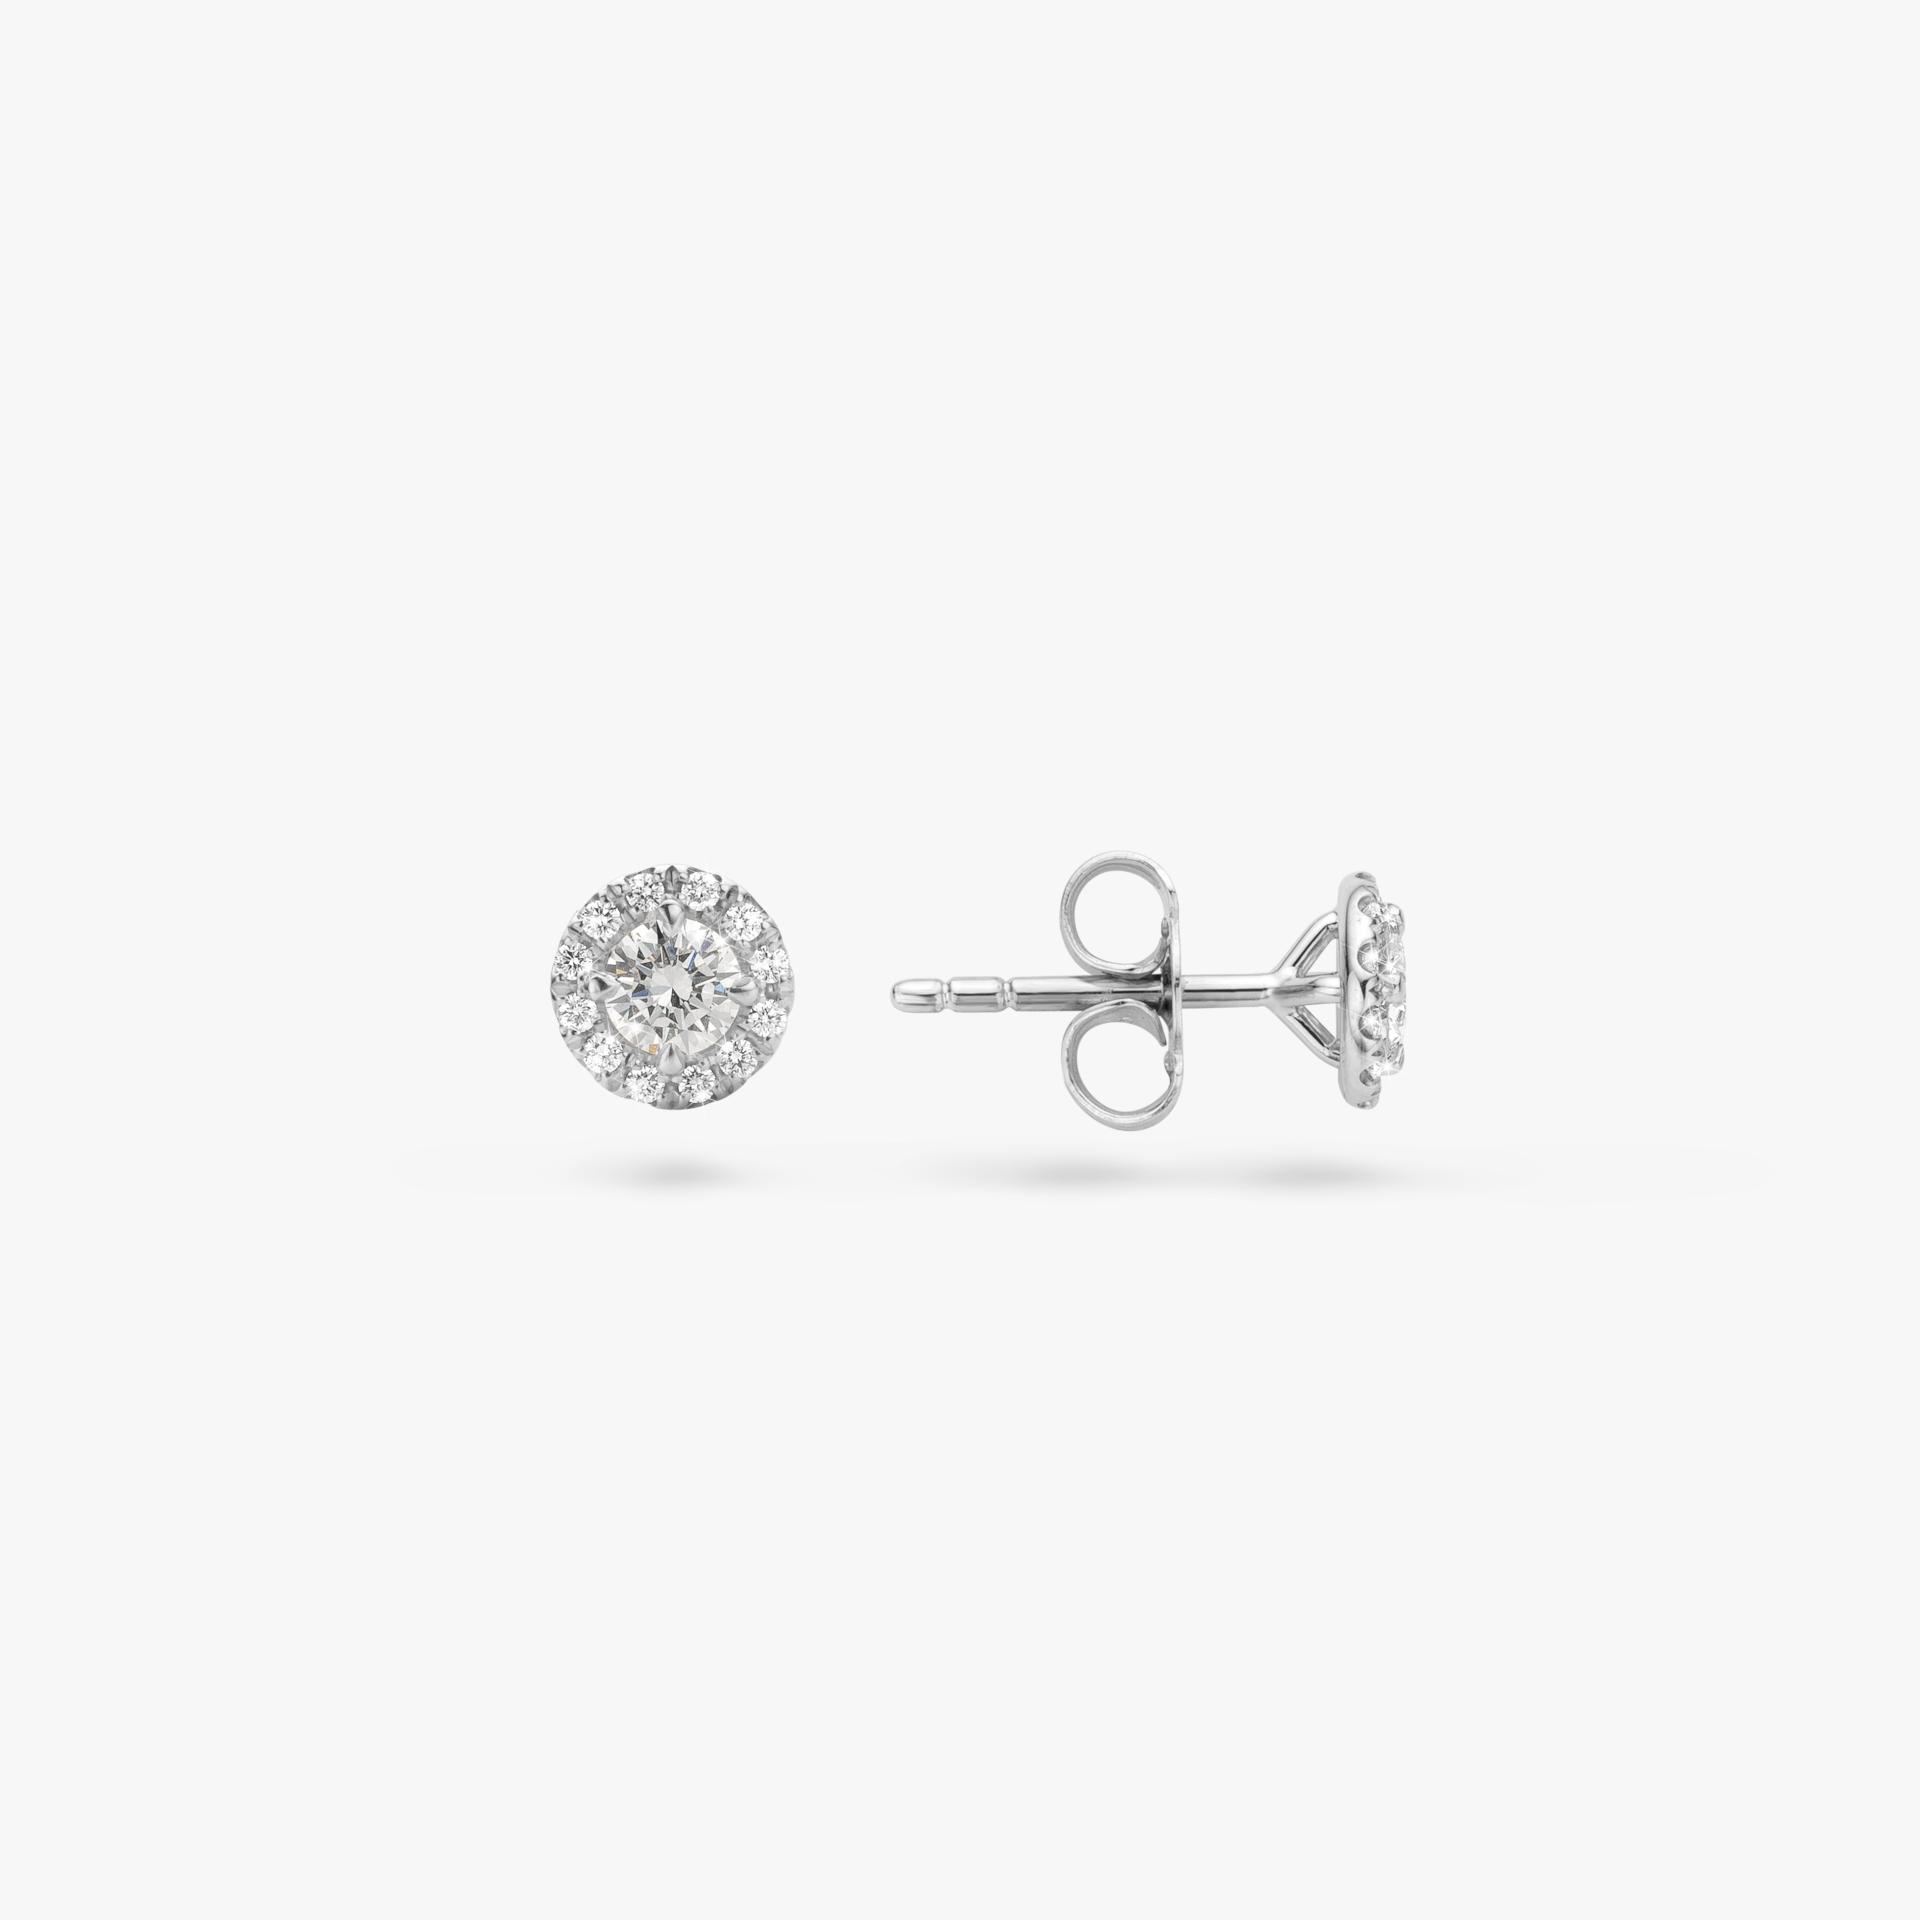 White gold earrings set with brilliant cut diamonds made by Maison De Greef